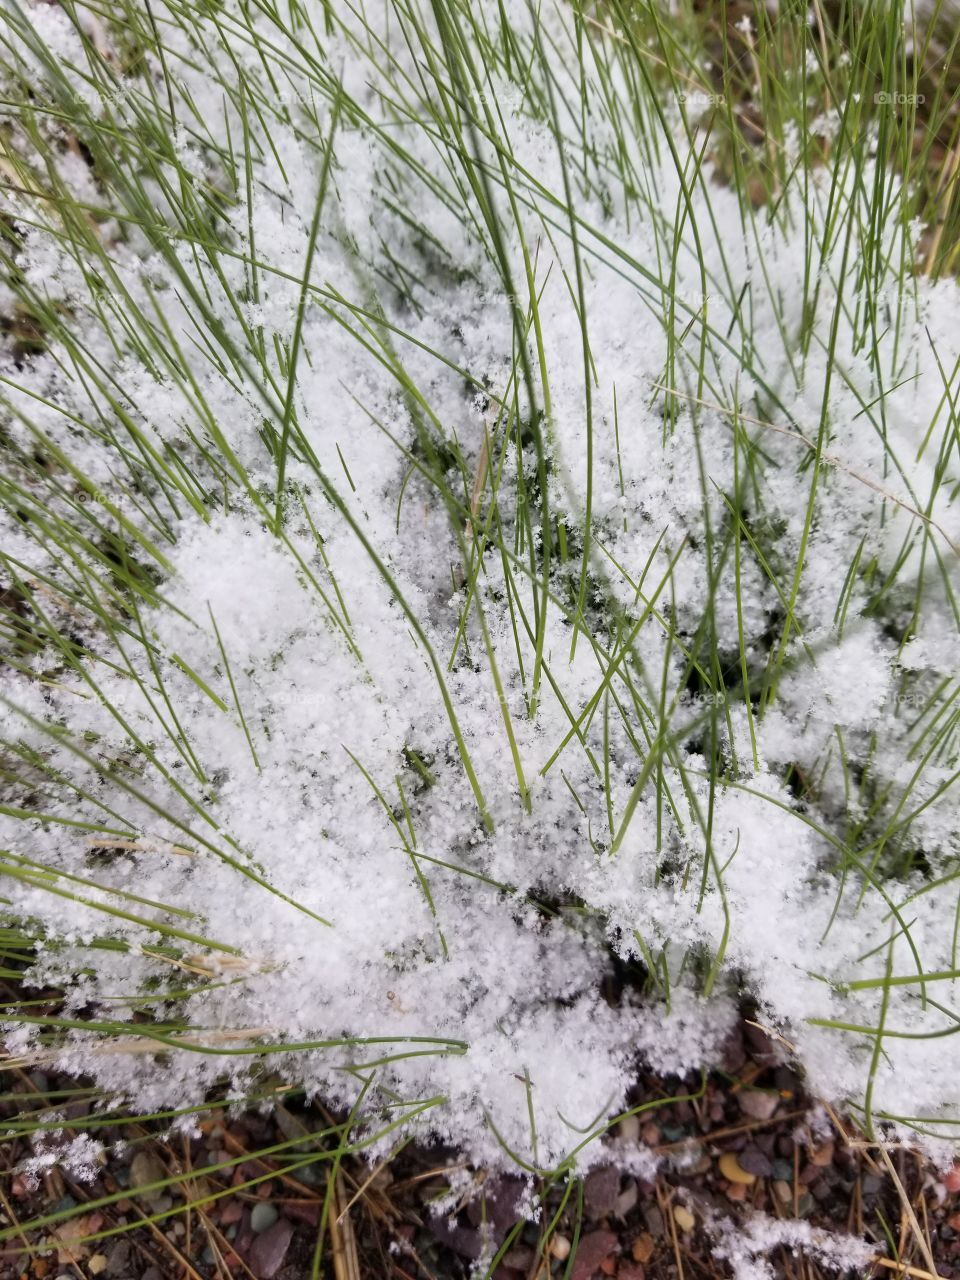 late spring snow covers the new growth of grass